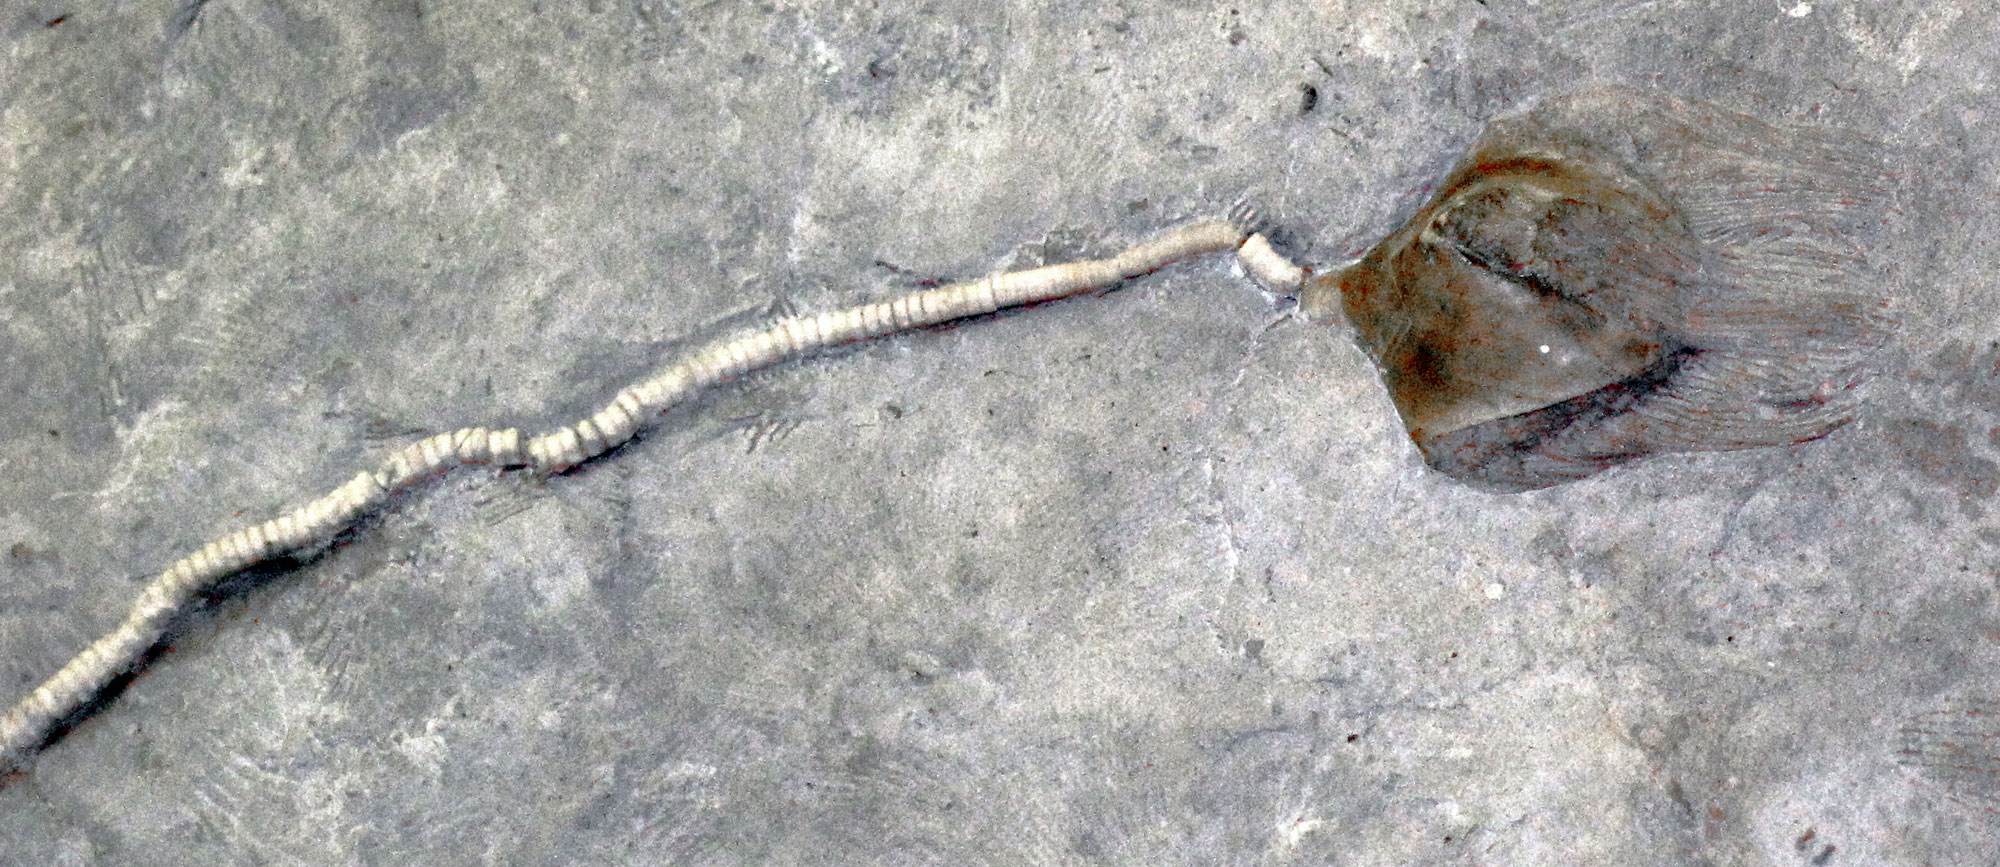 Photograph of a blastoid from the Mississippian of Indiana. The photo shows an blastoid with a long stalk starting at the left of the image and proceeding toward the right. At the end of the stalk is a theca with very fine brachioles.